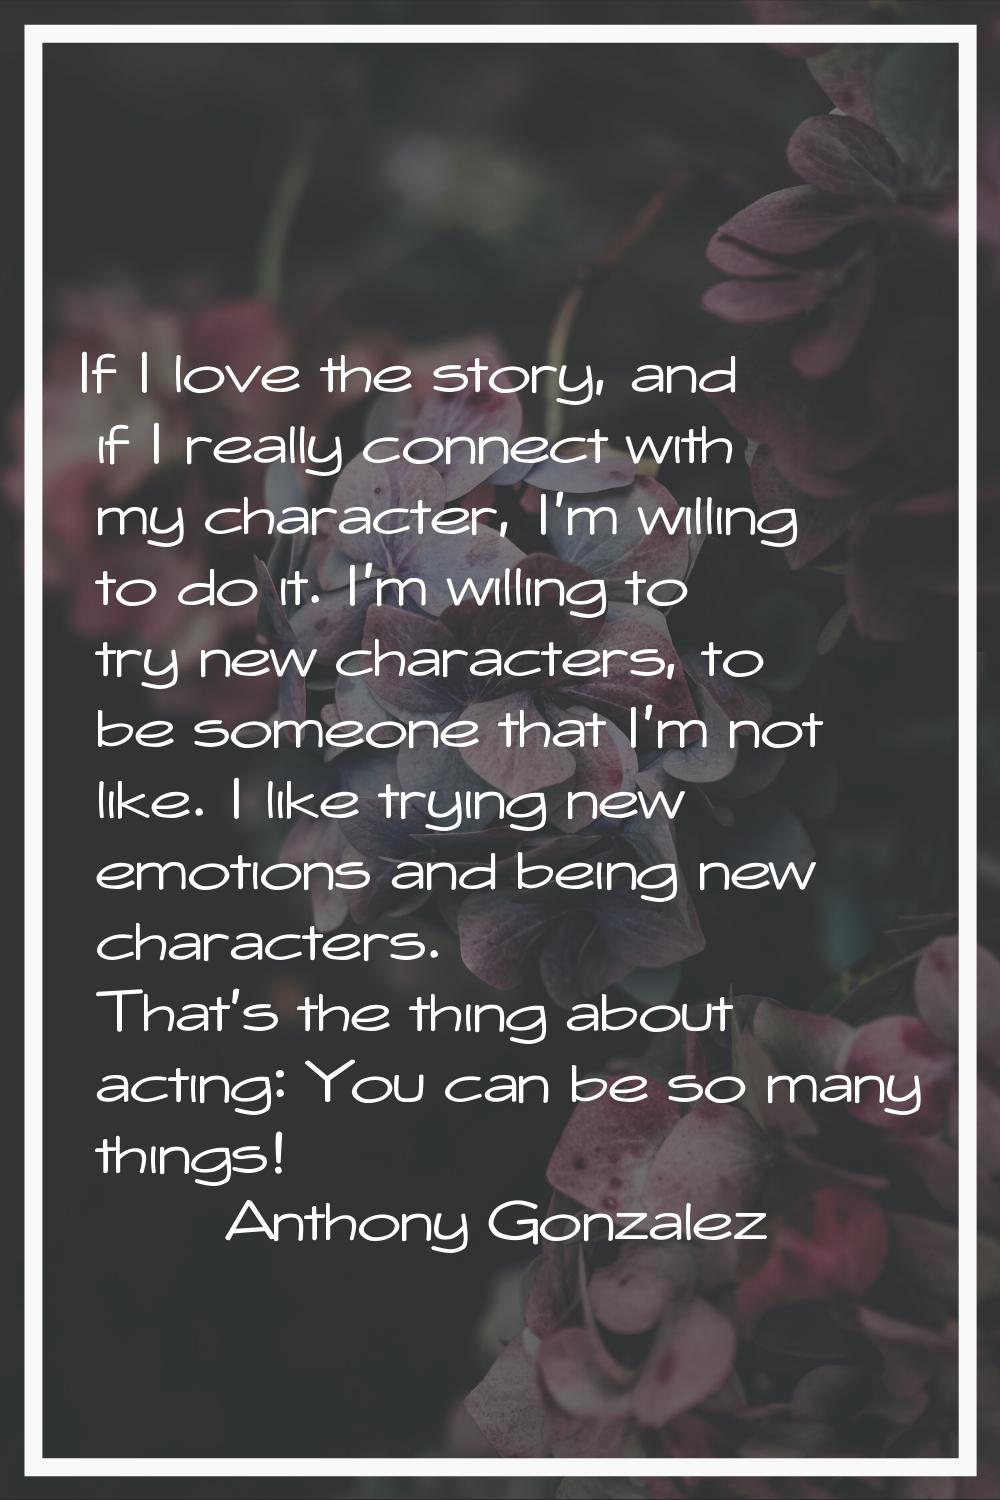 If I love the story, and if I really connect with my character, I'm willing to do it. I'm willing t